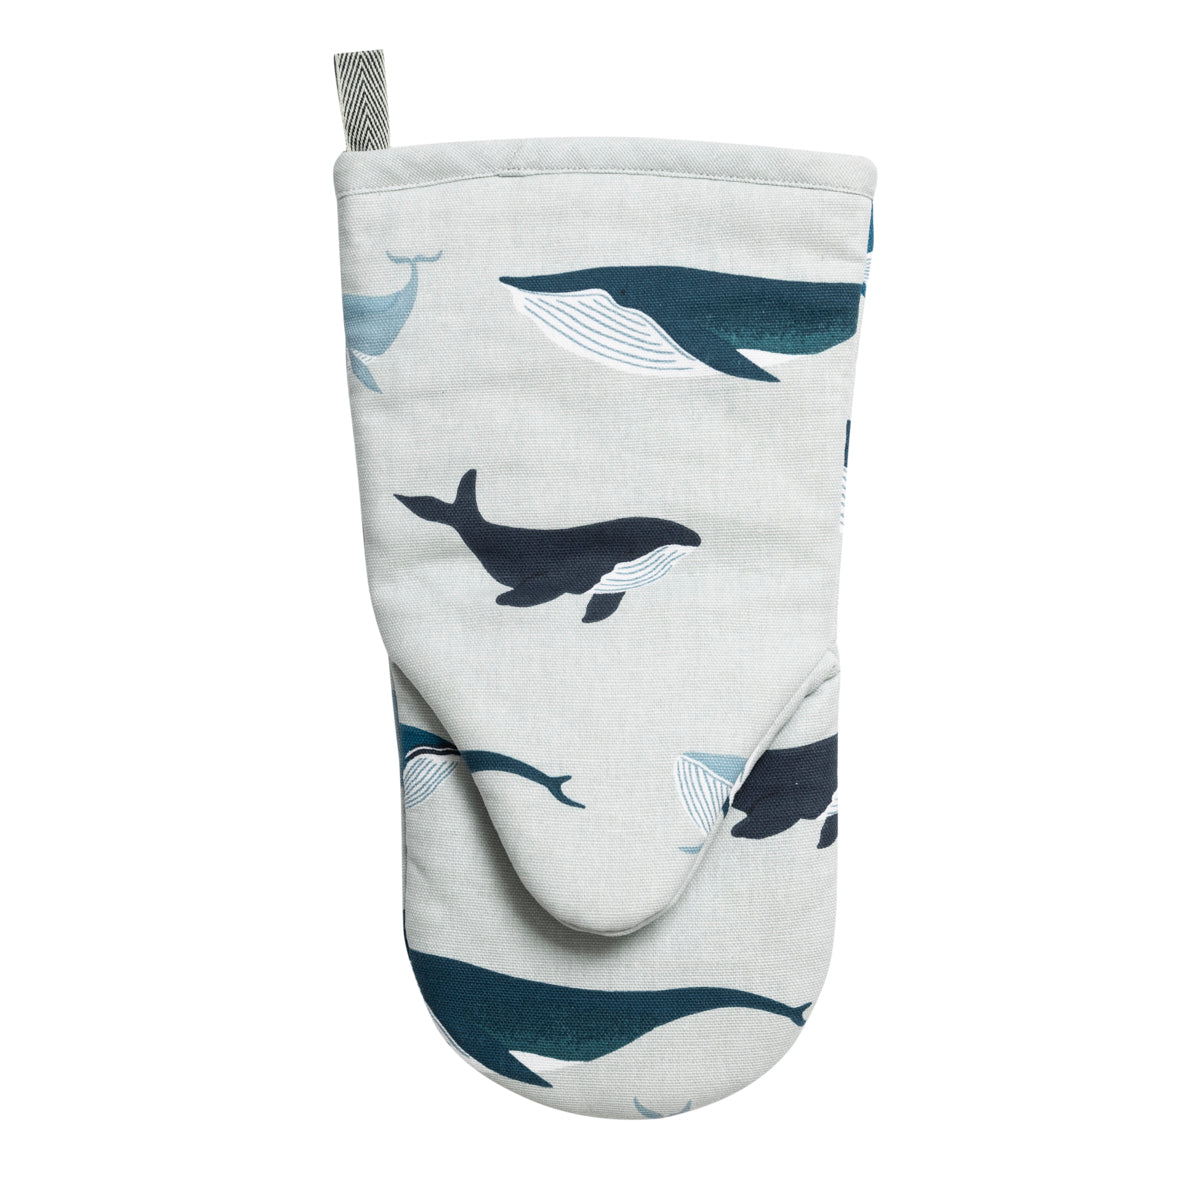 Whales Oven Mitt by Sophie Allport